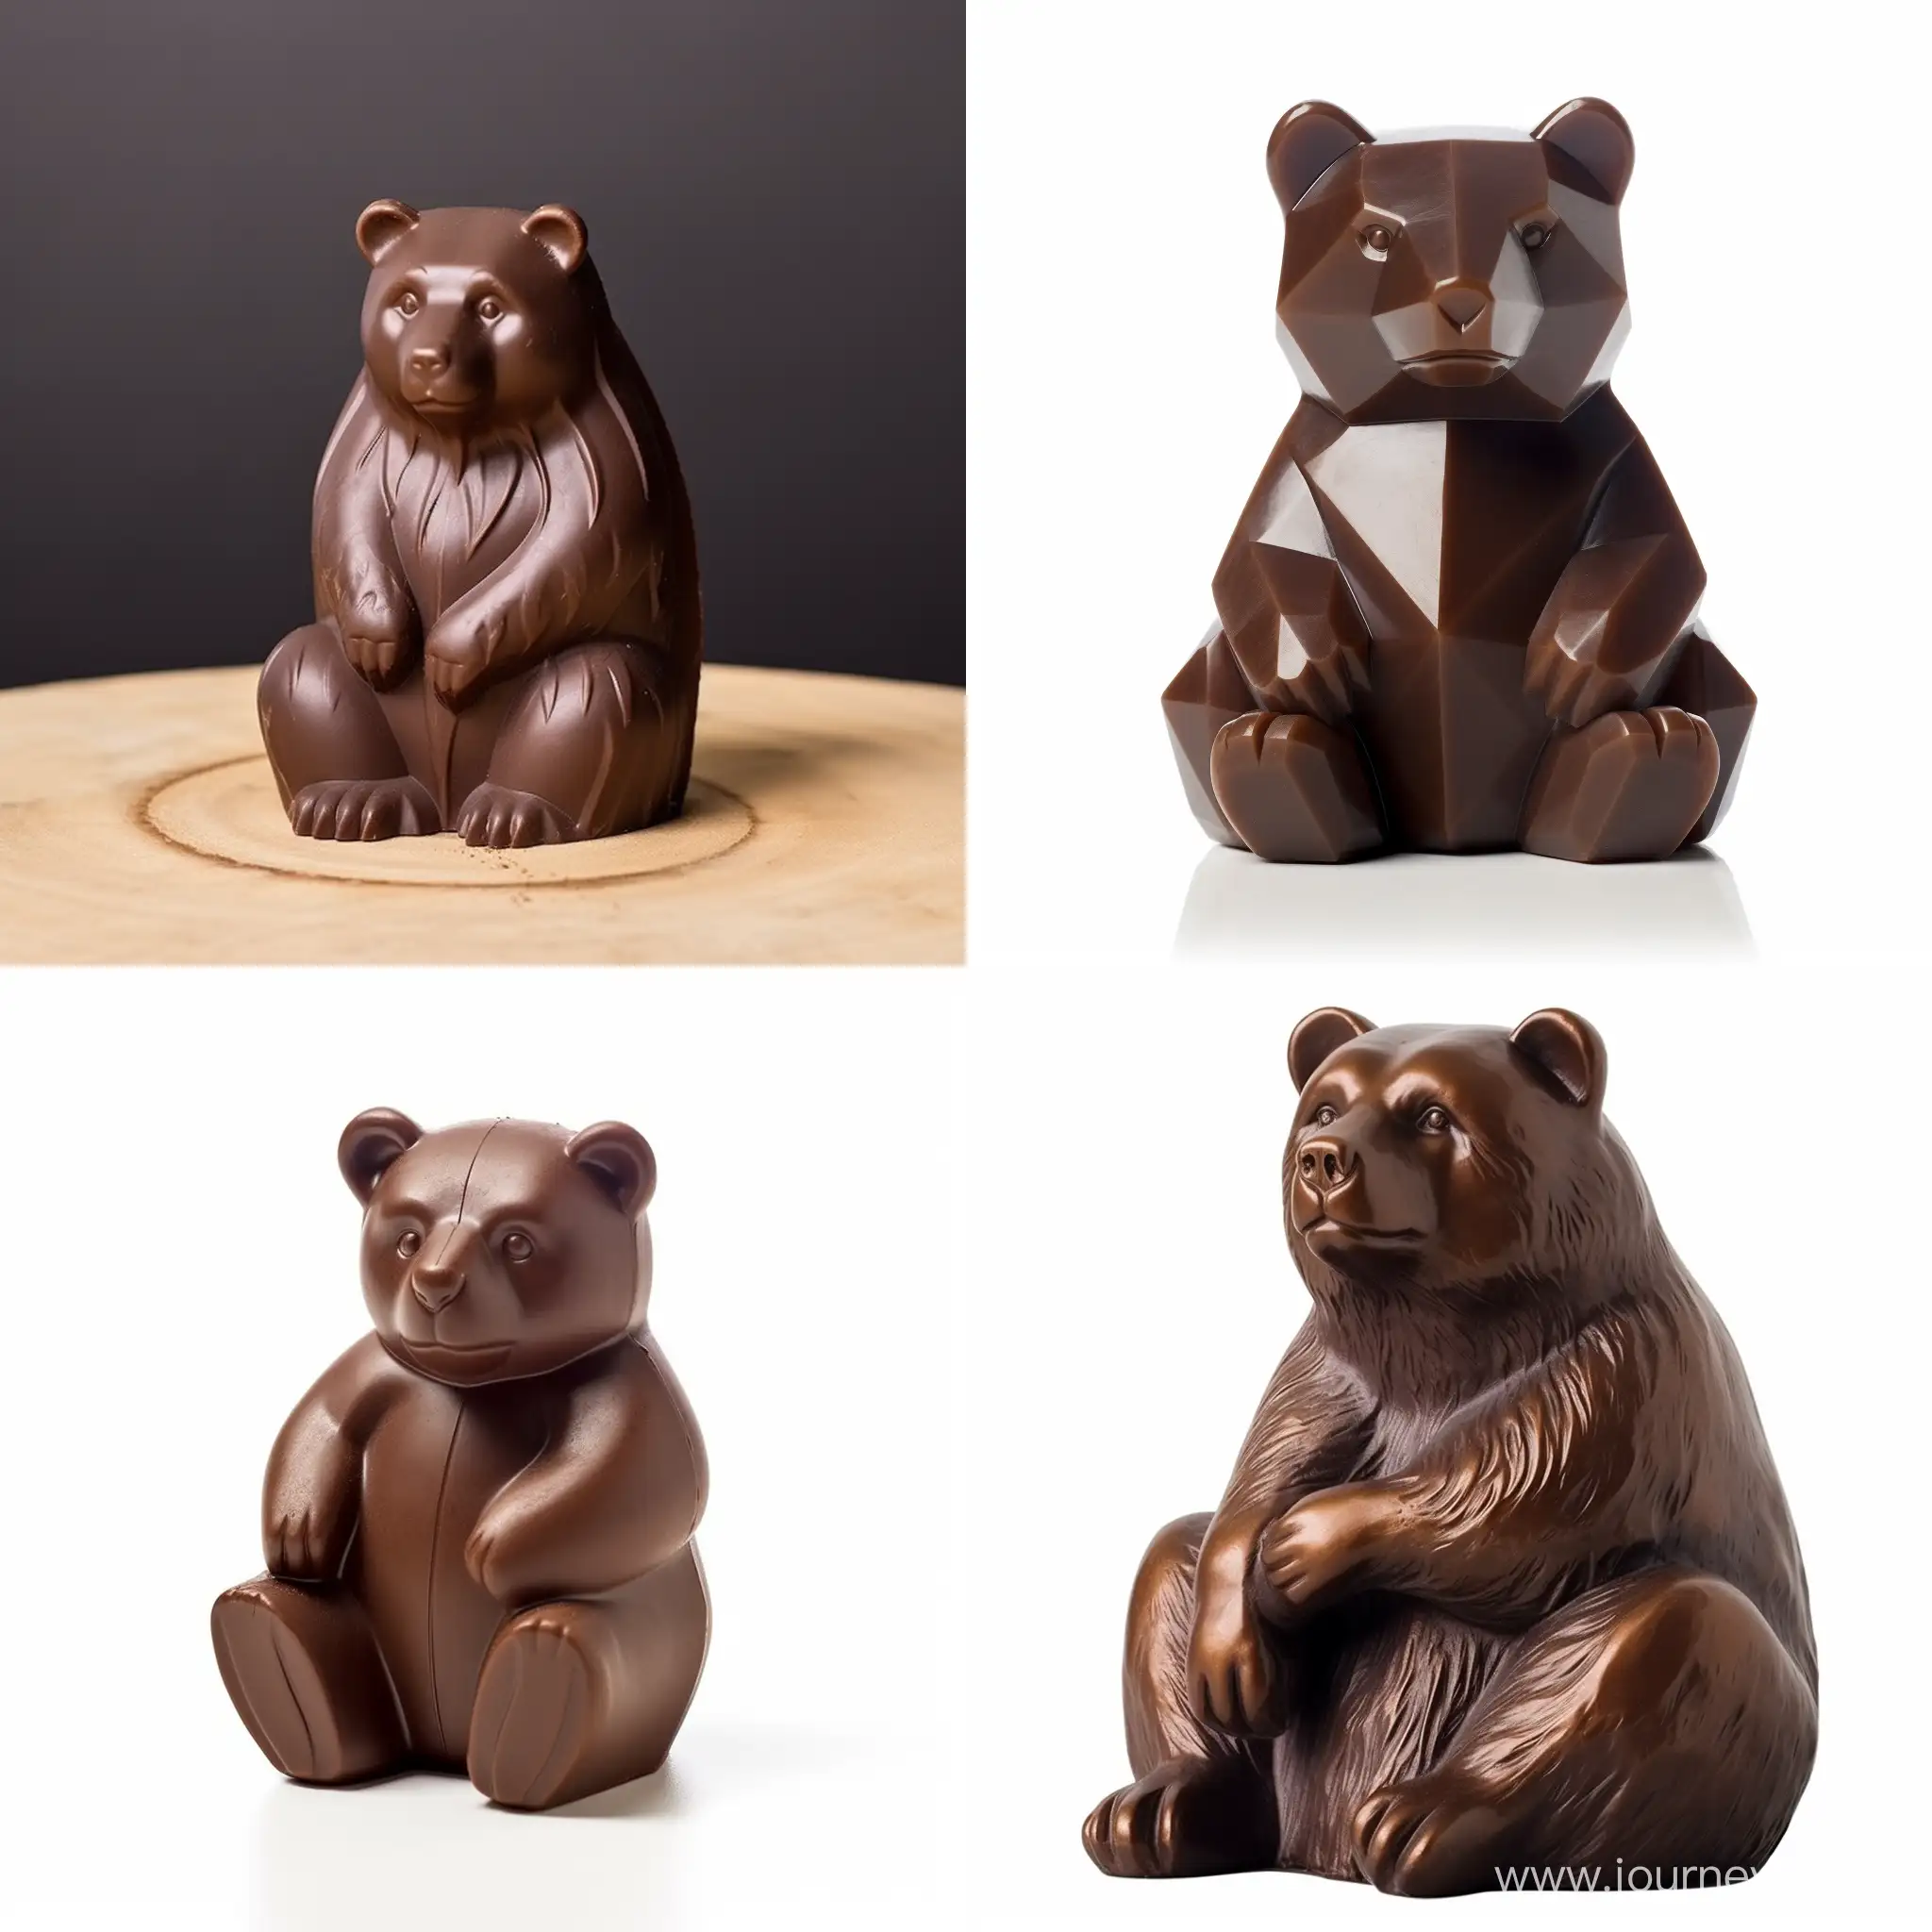 Chocolate in the shape of a bear with a two-dimensional angle to make the most of the chocolate. Dimensions: height 5 cm, width 3 cm, diameter 3 cm.